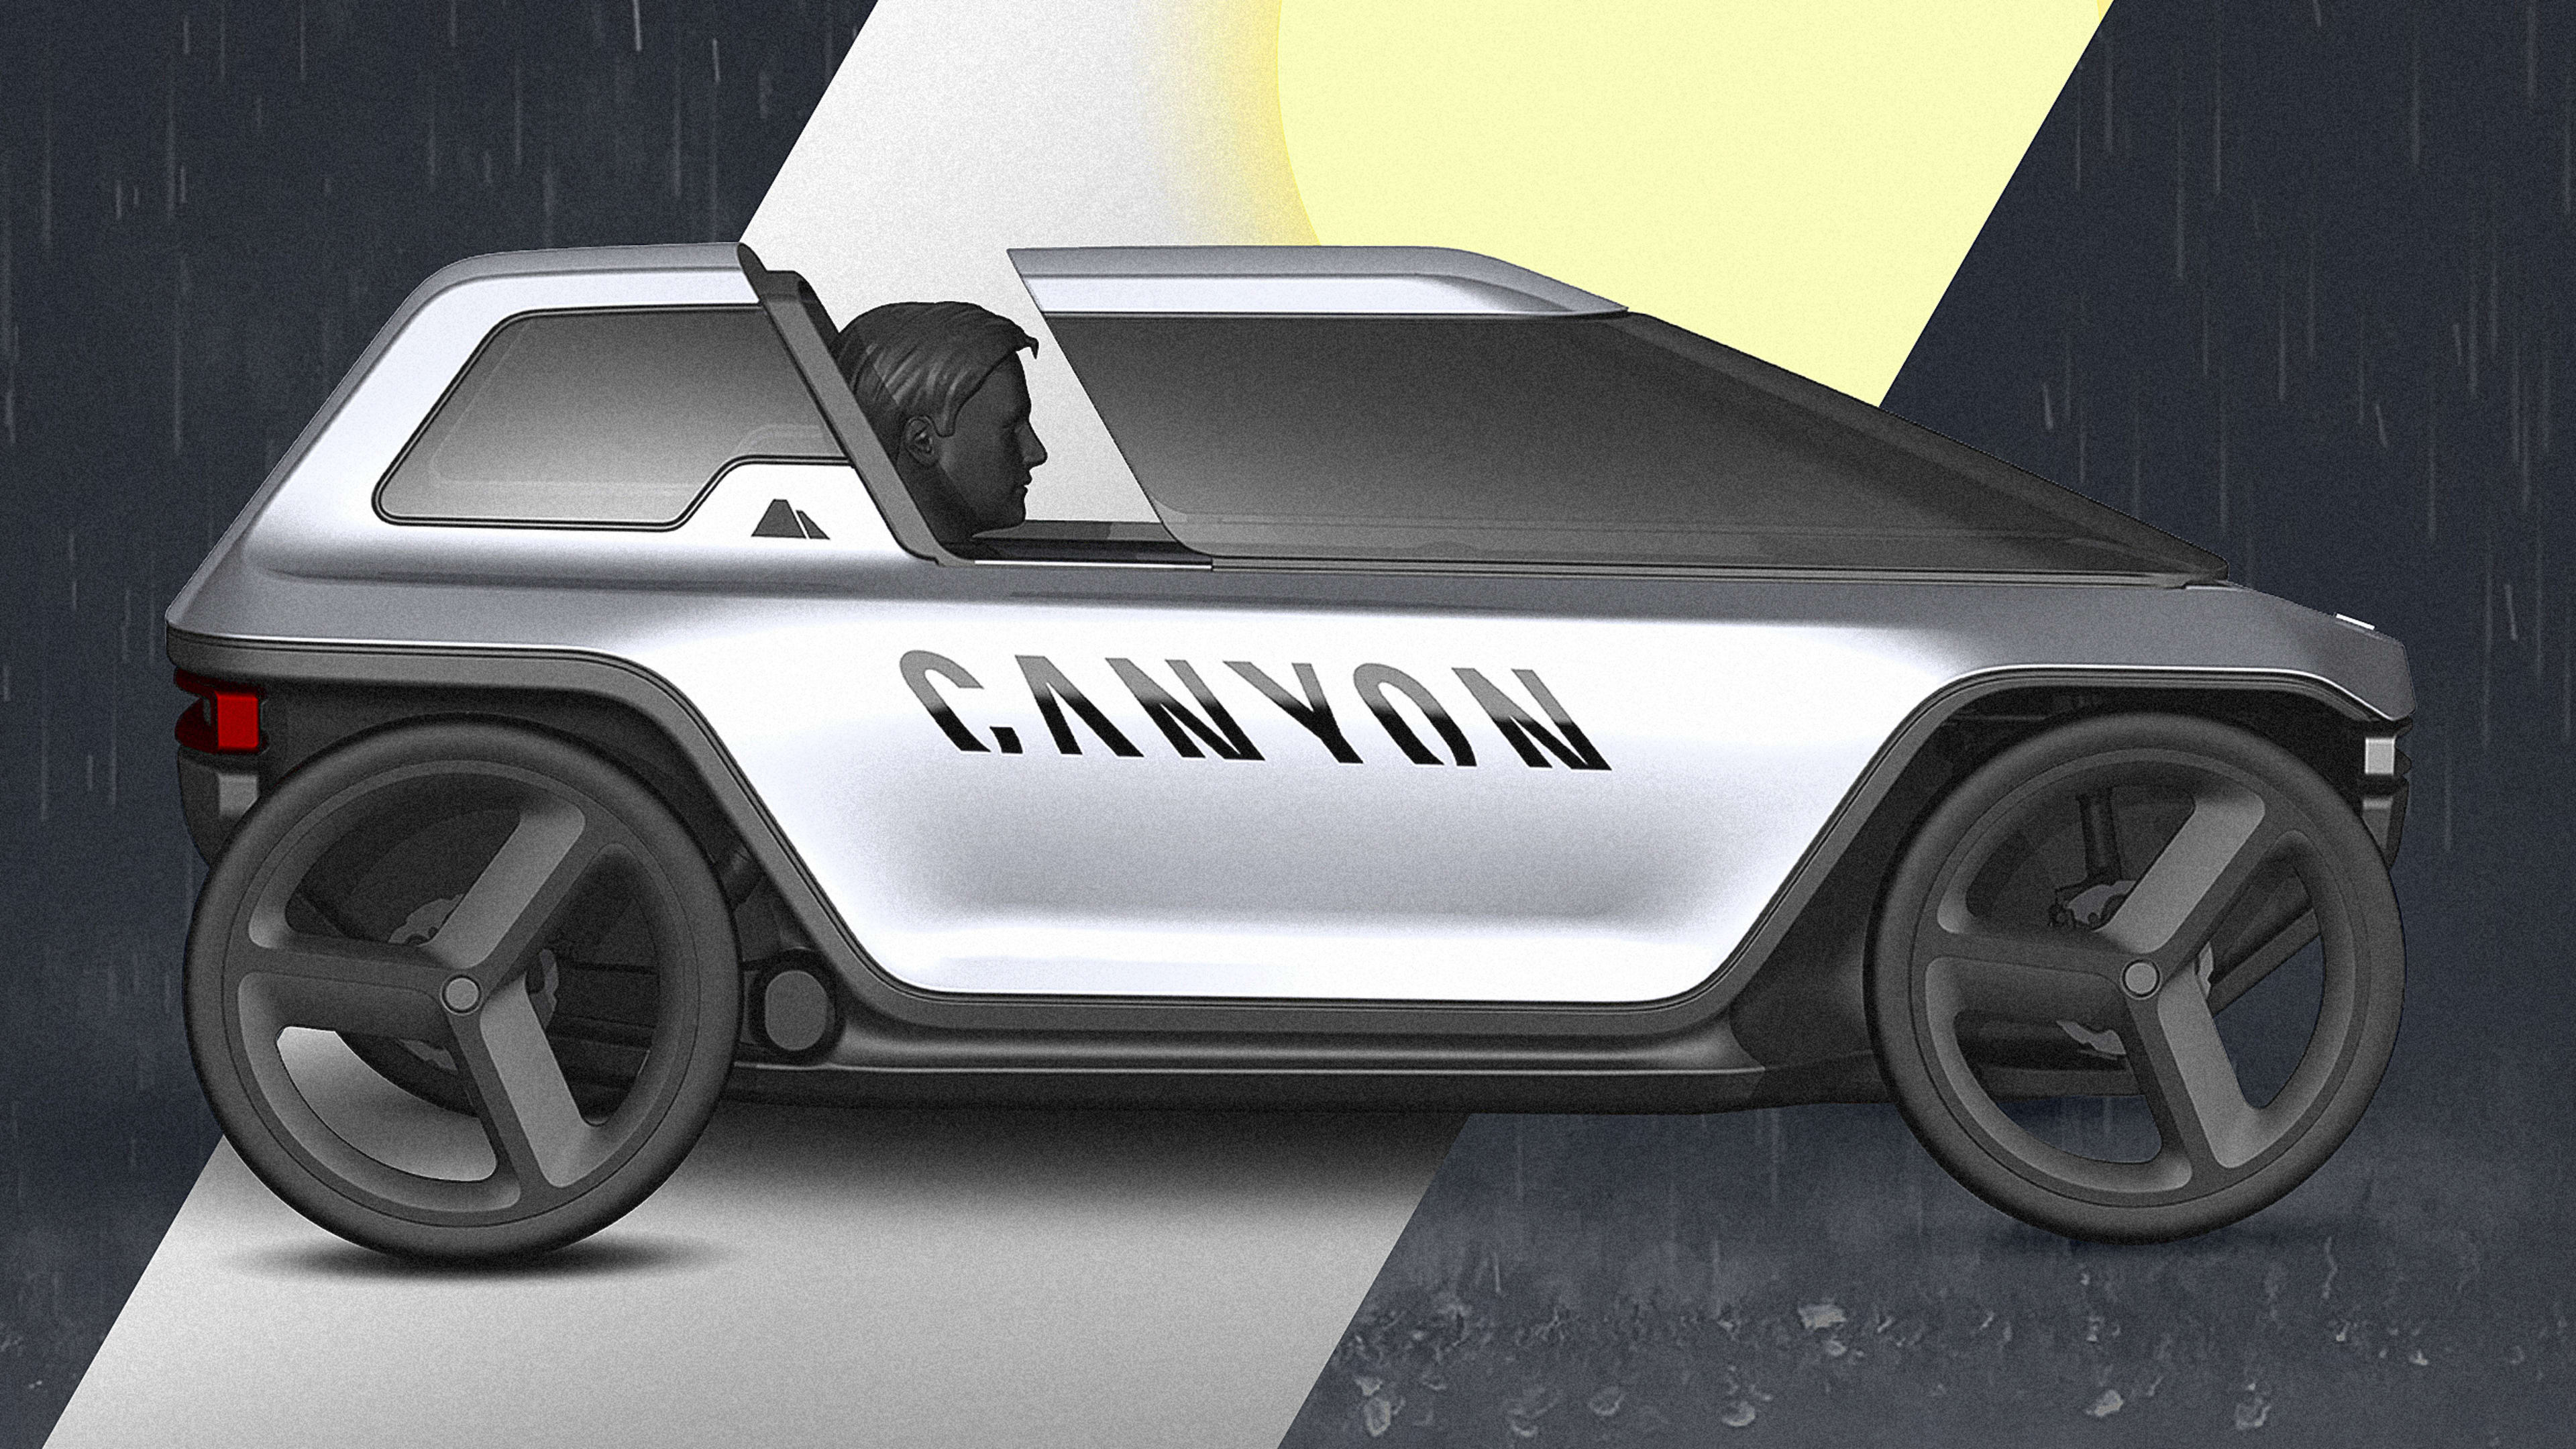 The car of the future might look more like the Flintstones’ than the Jetsons’